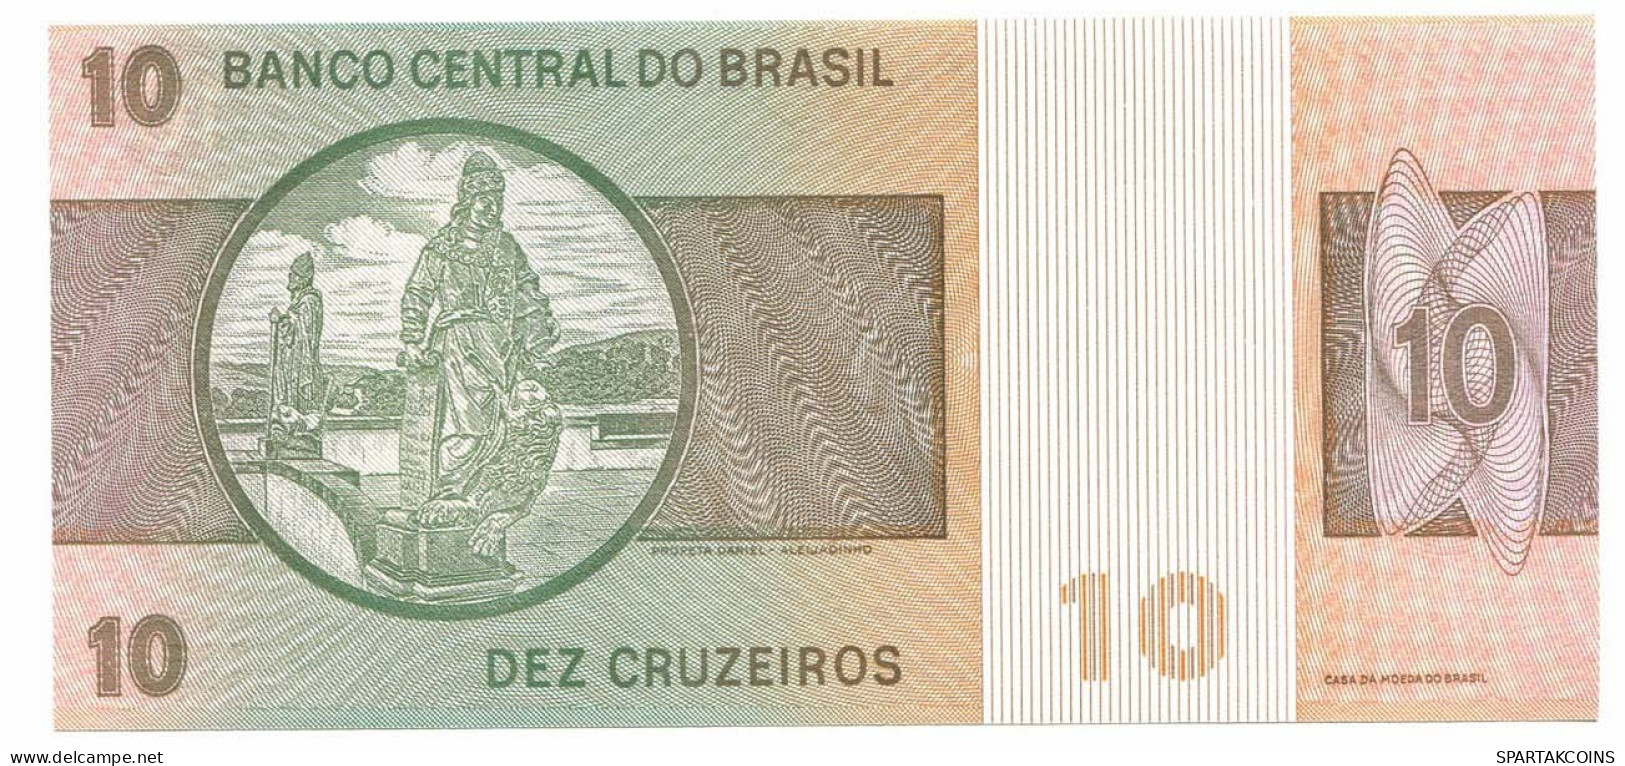 BRASIL 10 CRUZEIROS 1970 UNC Paper Money Banknote #P10836.4 - [11] Local Banknote Issues